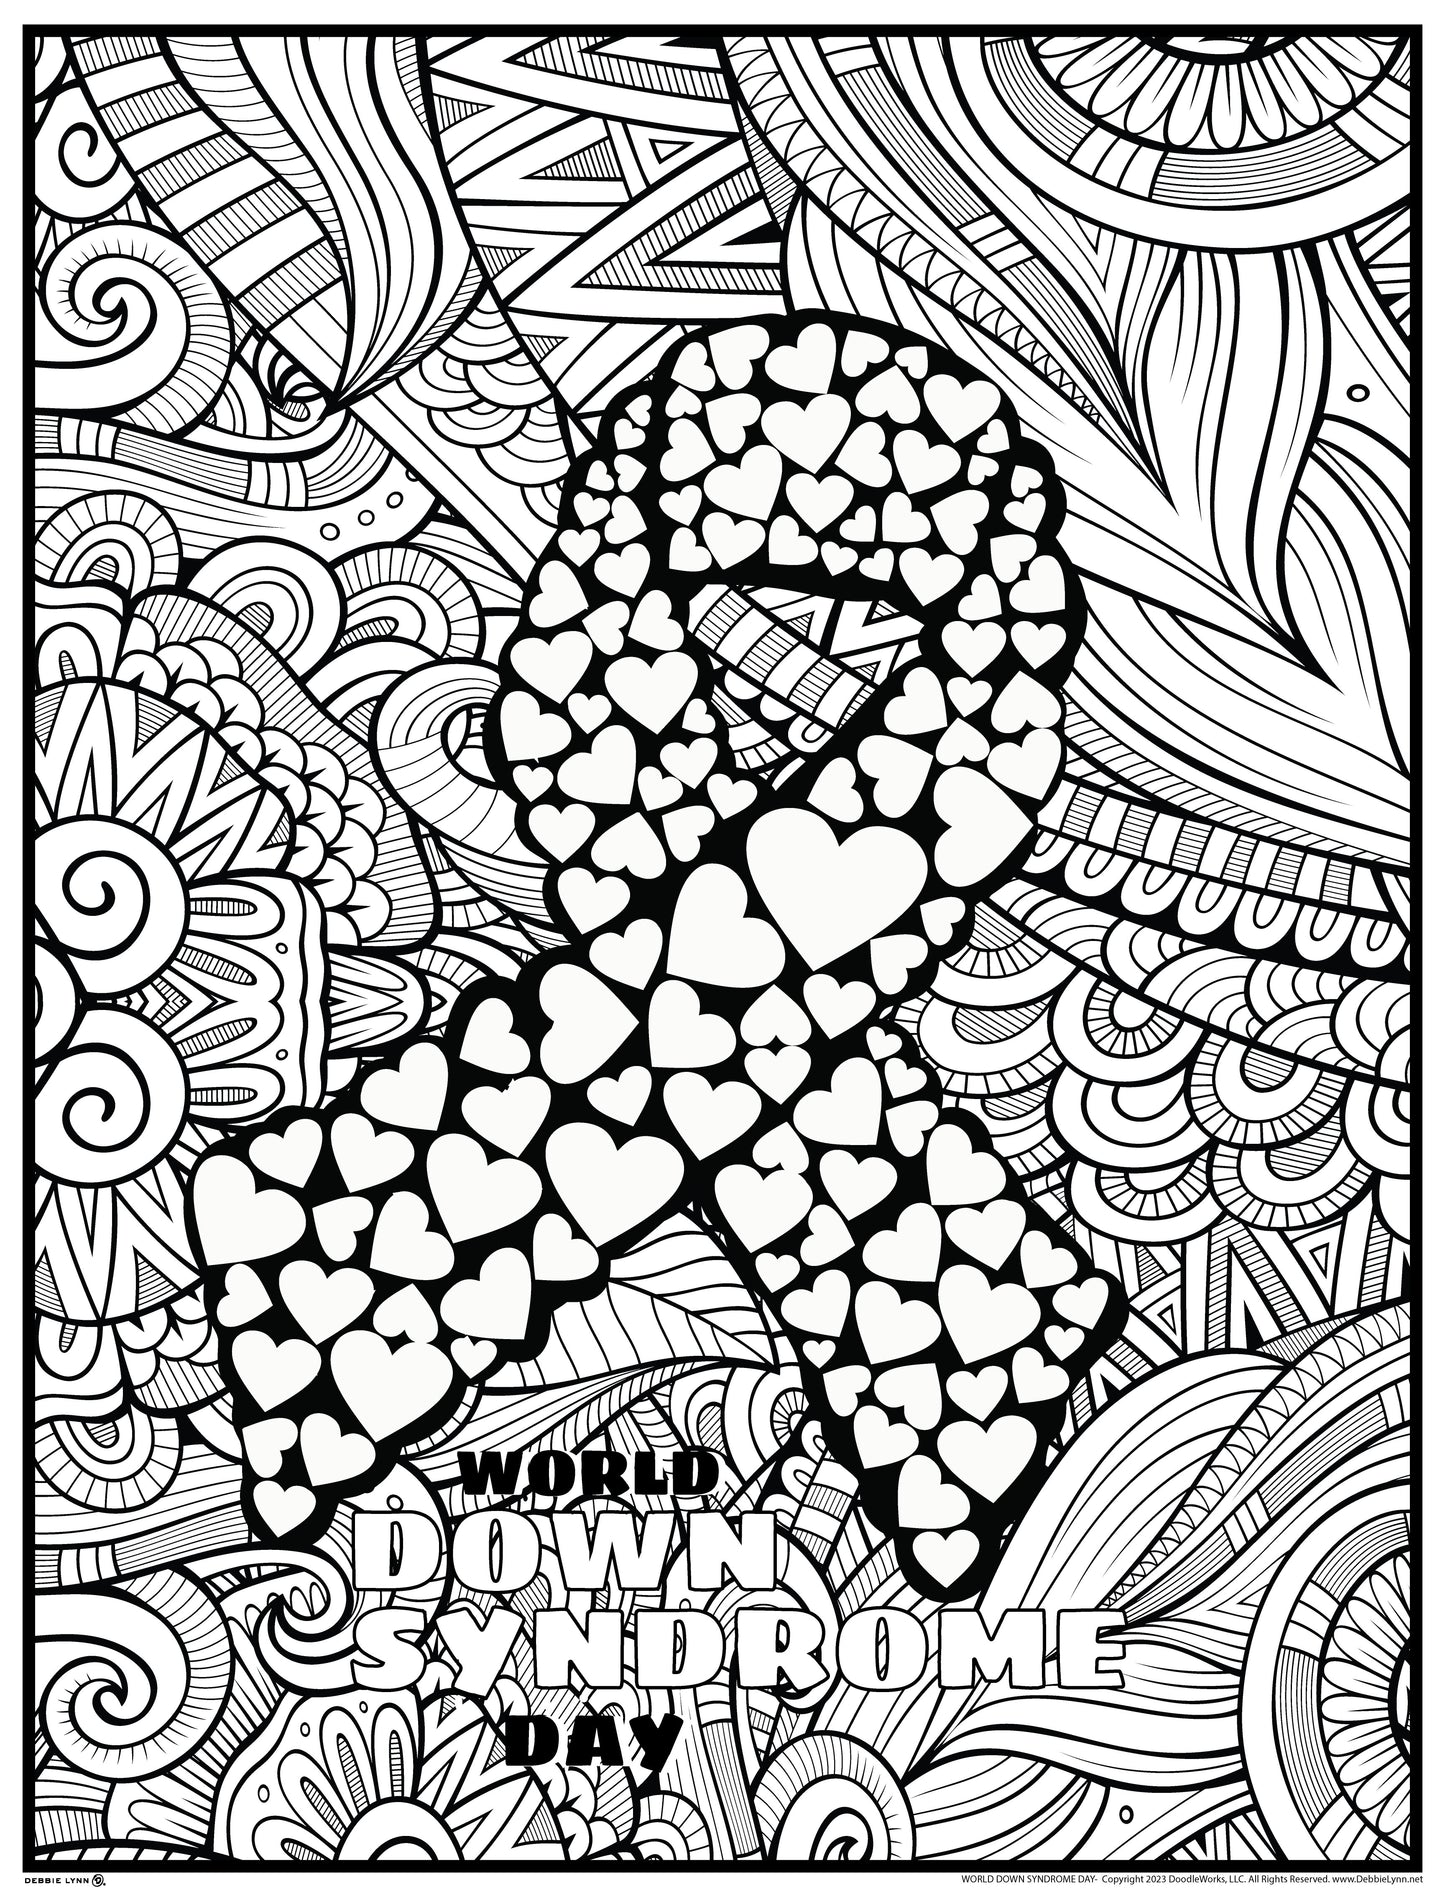 Down Syndrome Day Personalized Giant Coloring Poster 46" x 60"